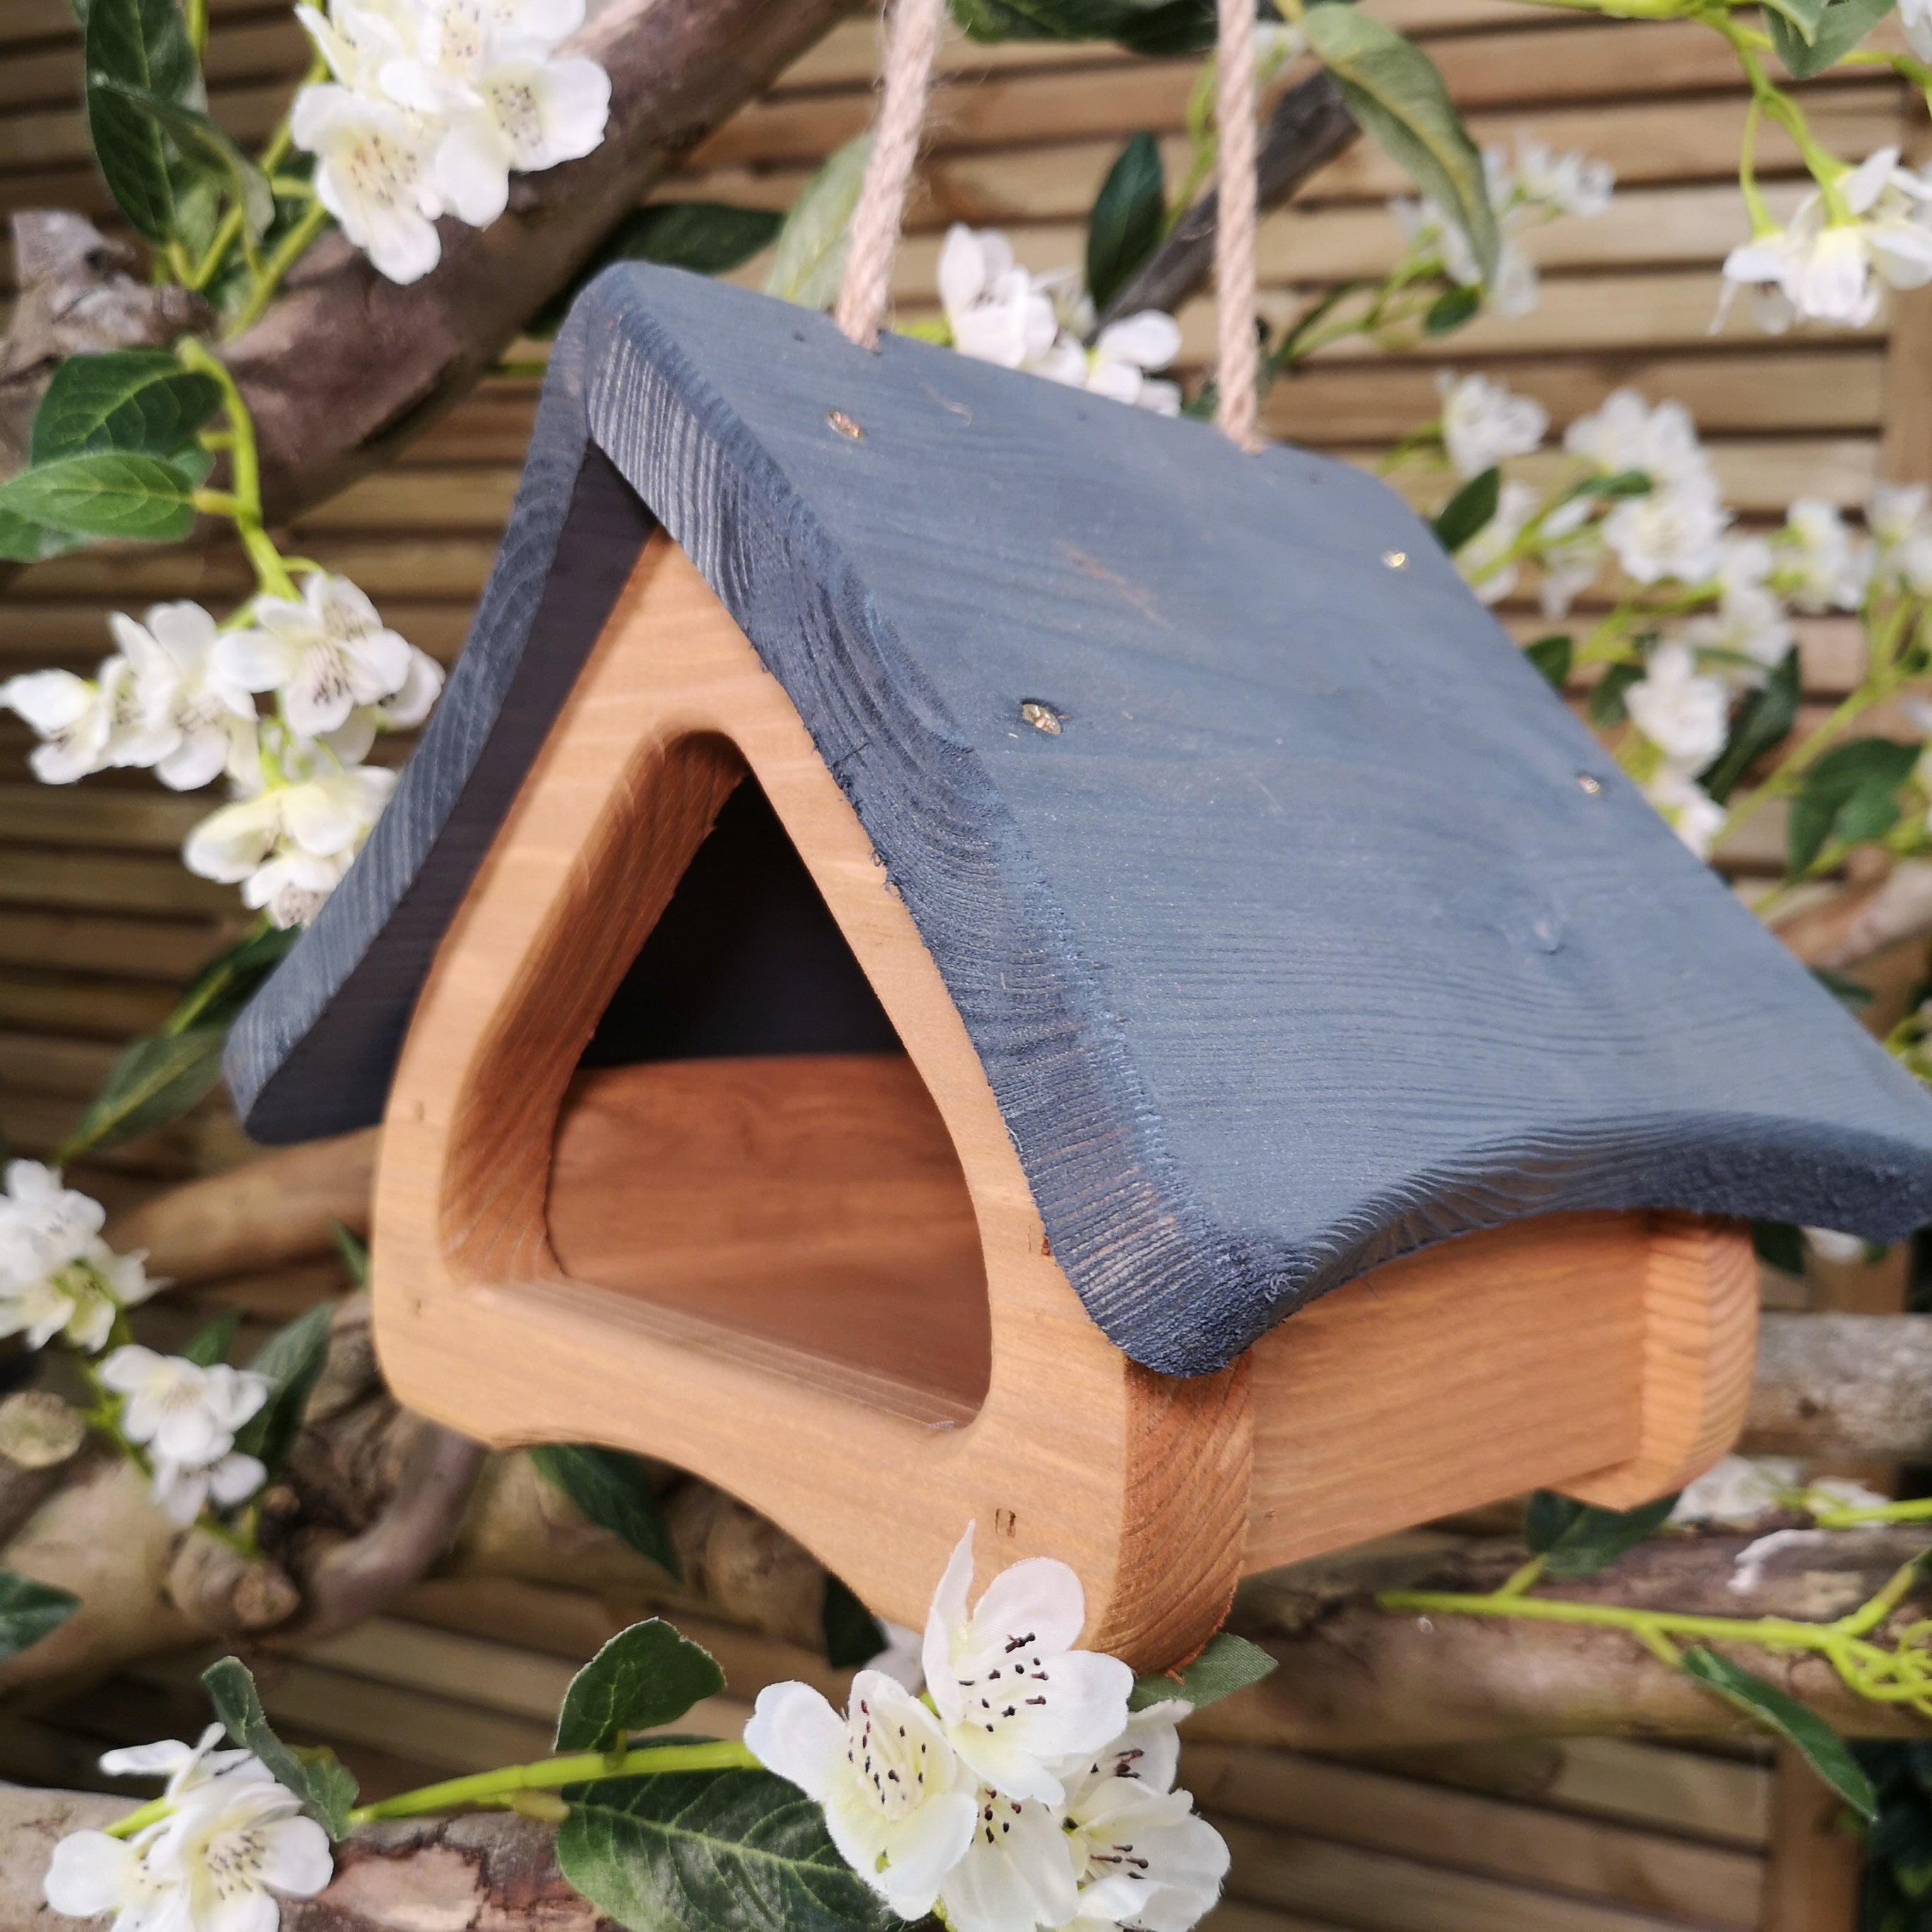 Faraway Modern Wooden Garden Wild Bird Hanging Easy Fill Seed Feeder Table with Grey Roof